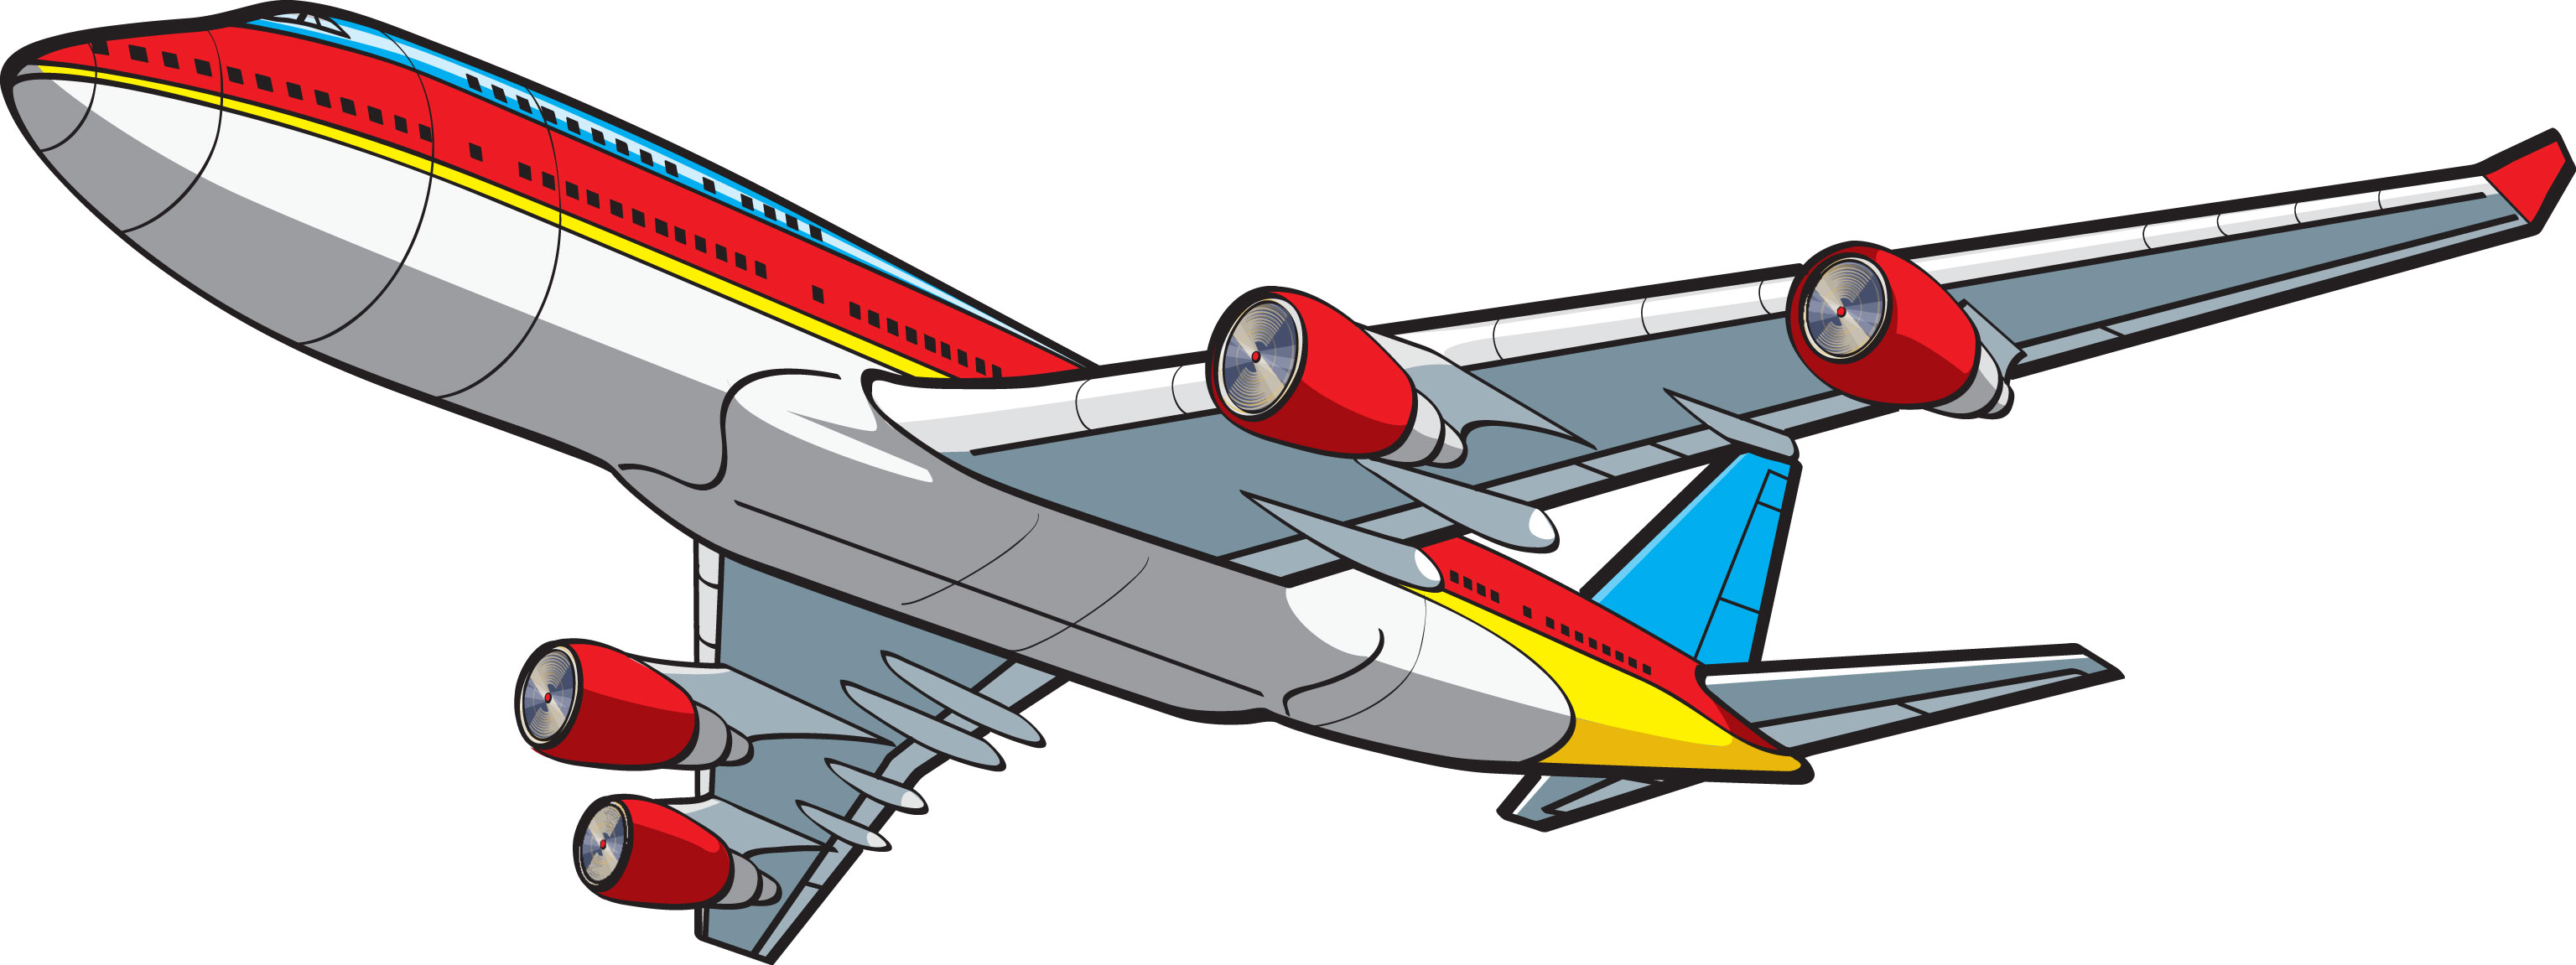 free download clipart aircraft - photo #32